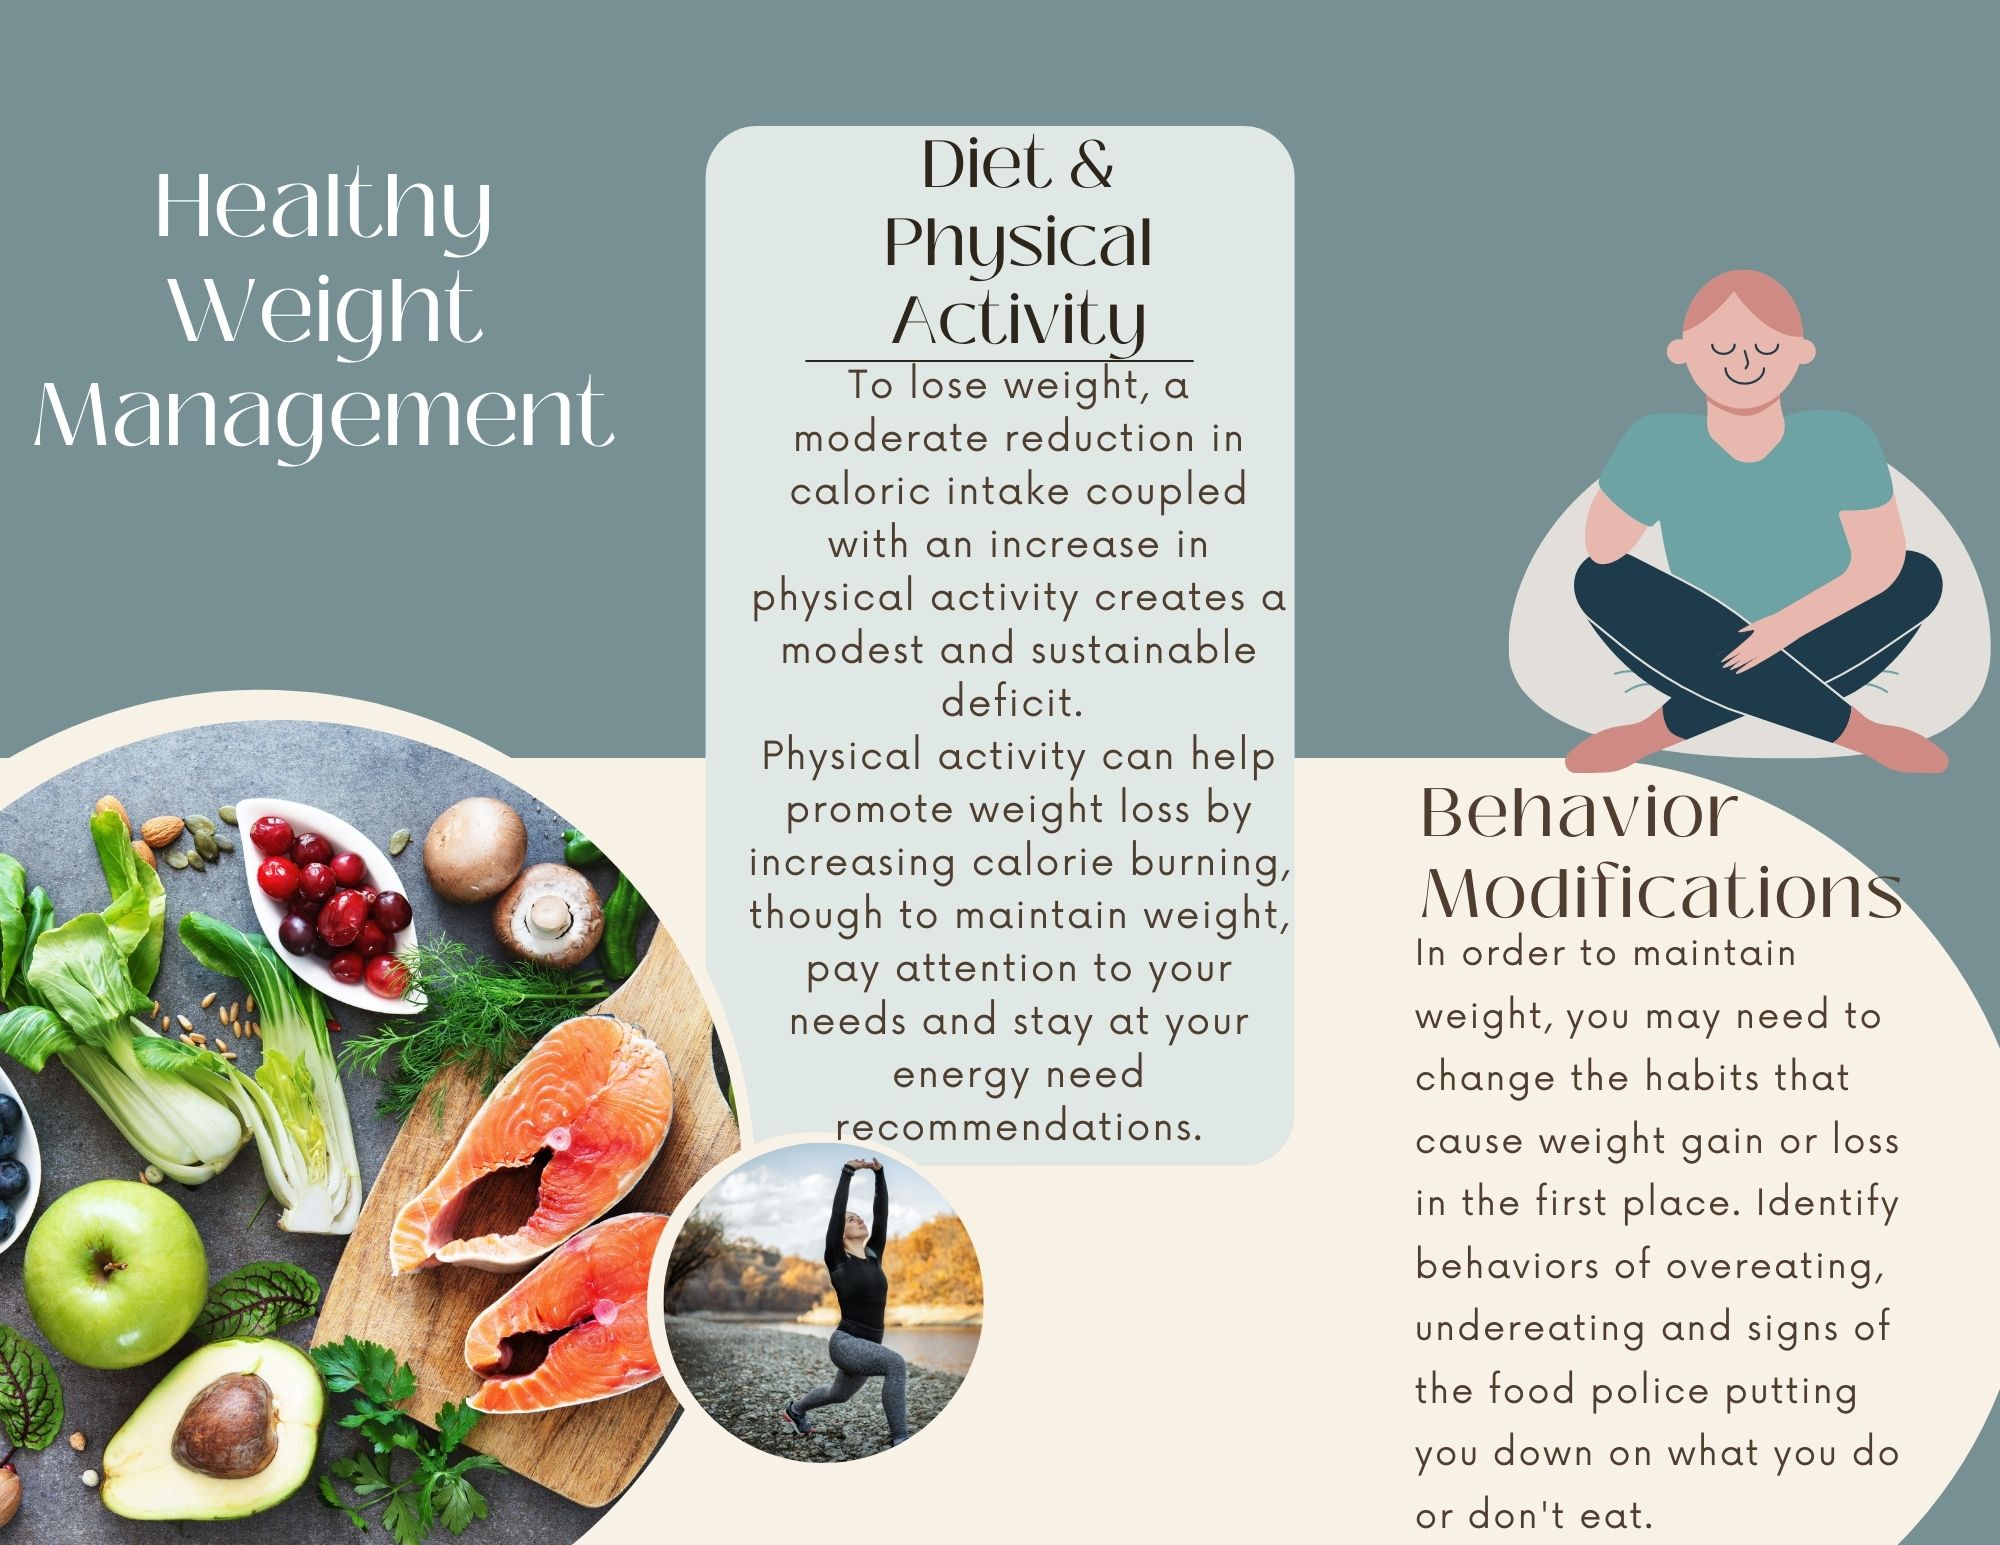 Infographic summarizing healthy behaviors to help with weight management: diet, physical activity, and behavior modifications